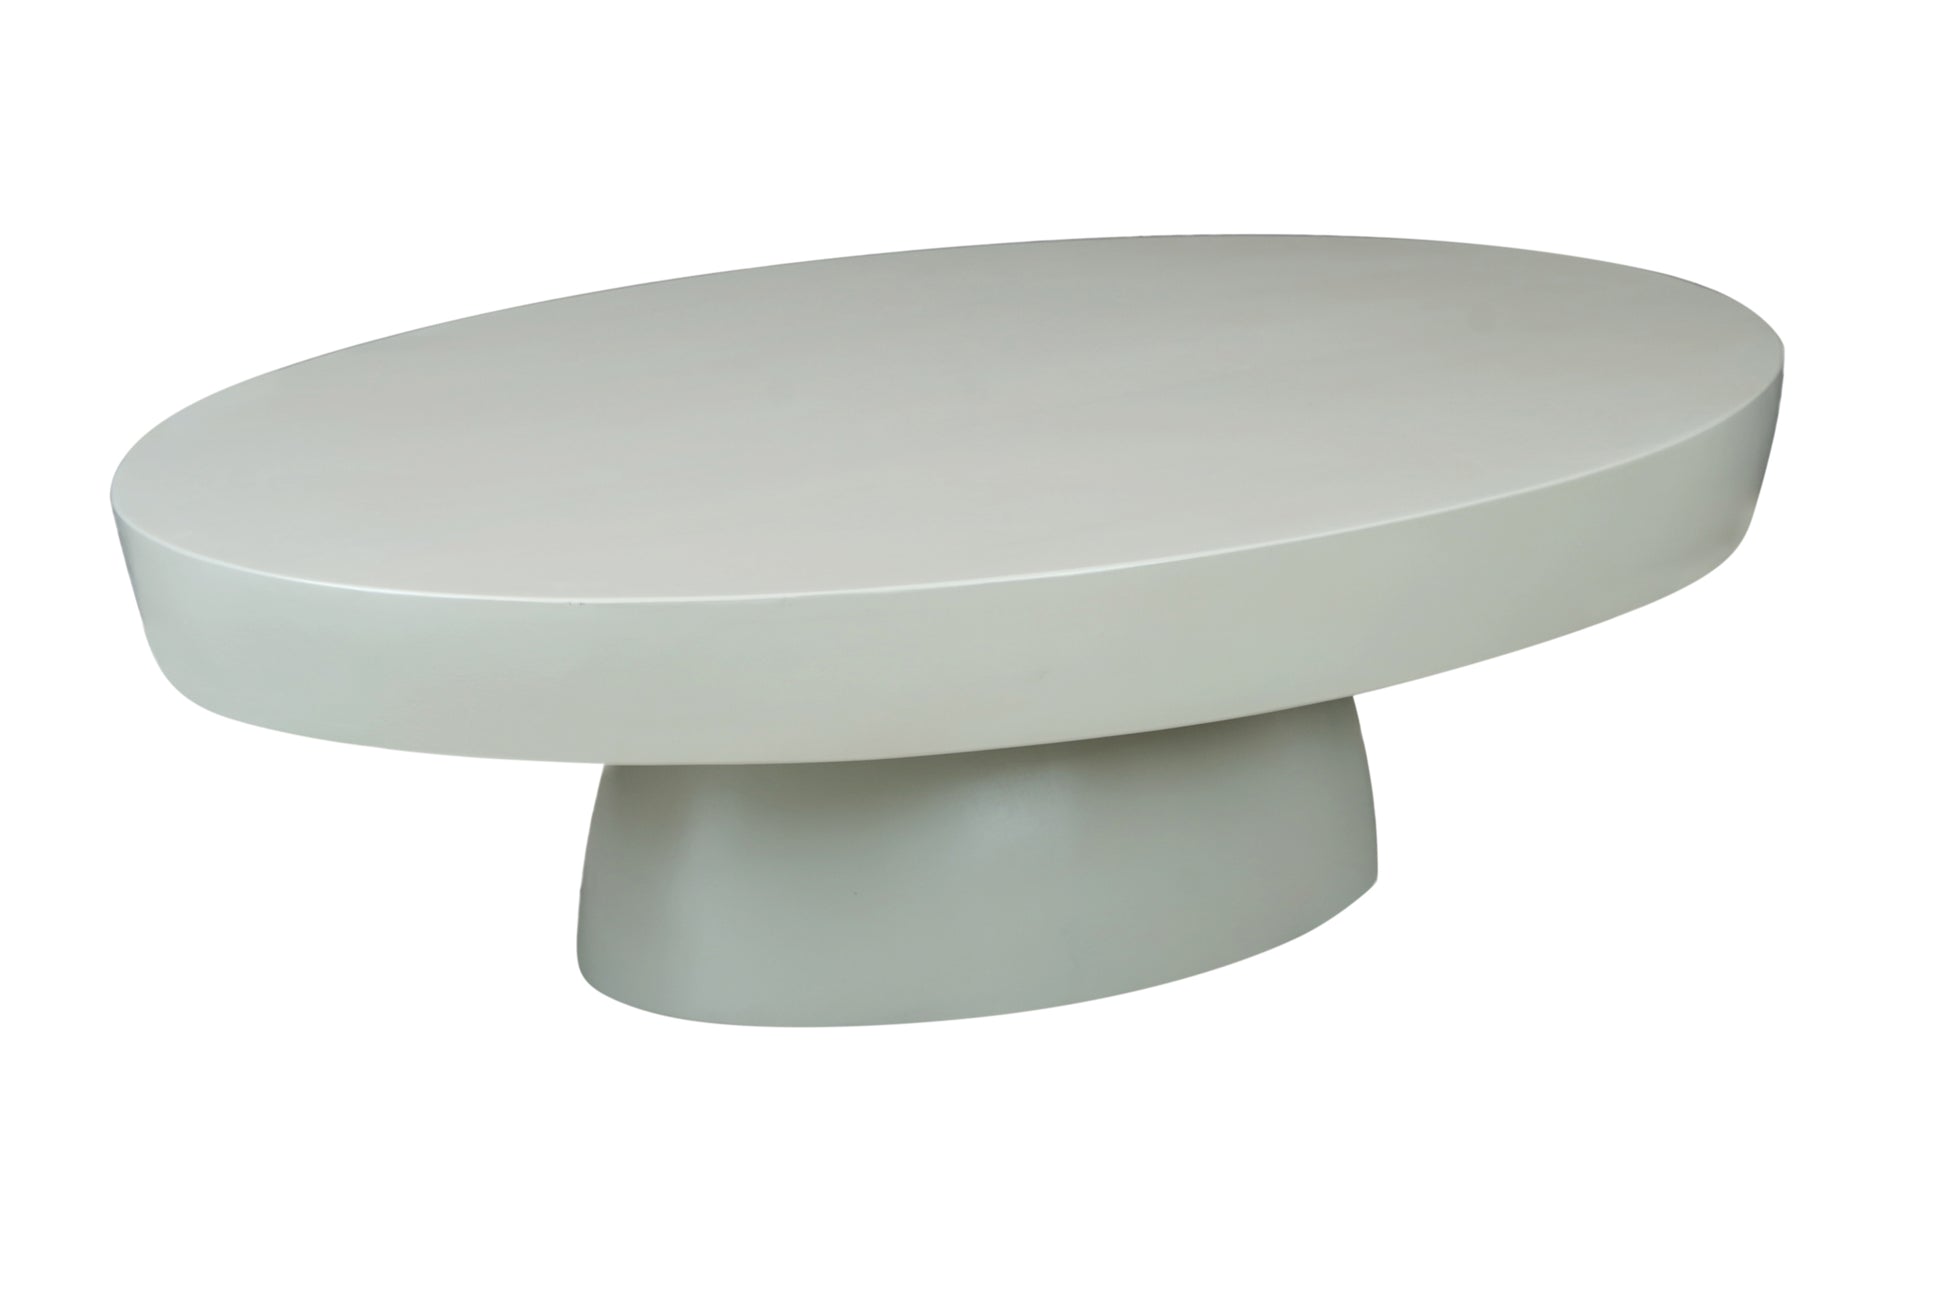 Premium Oval White Wooden Coffee Table - Enova Luxe Home Store